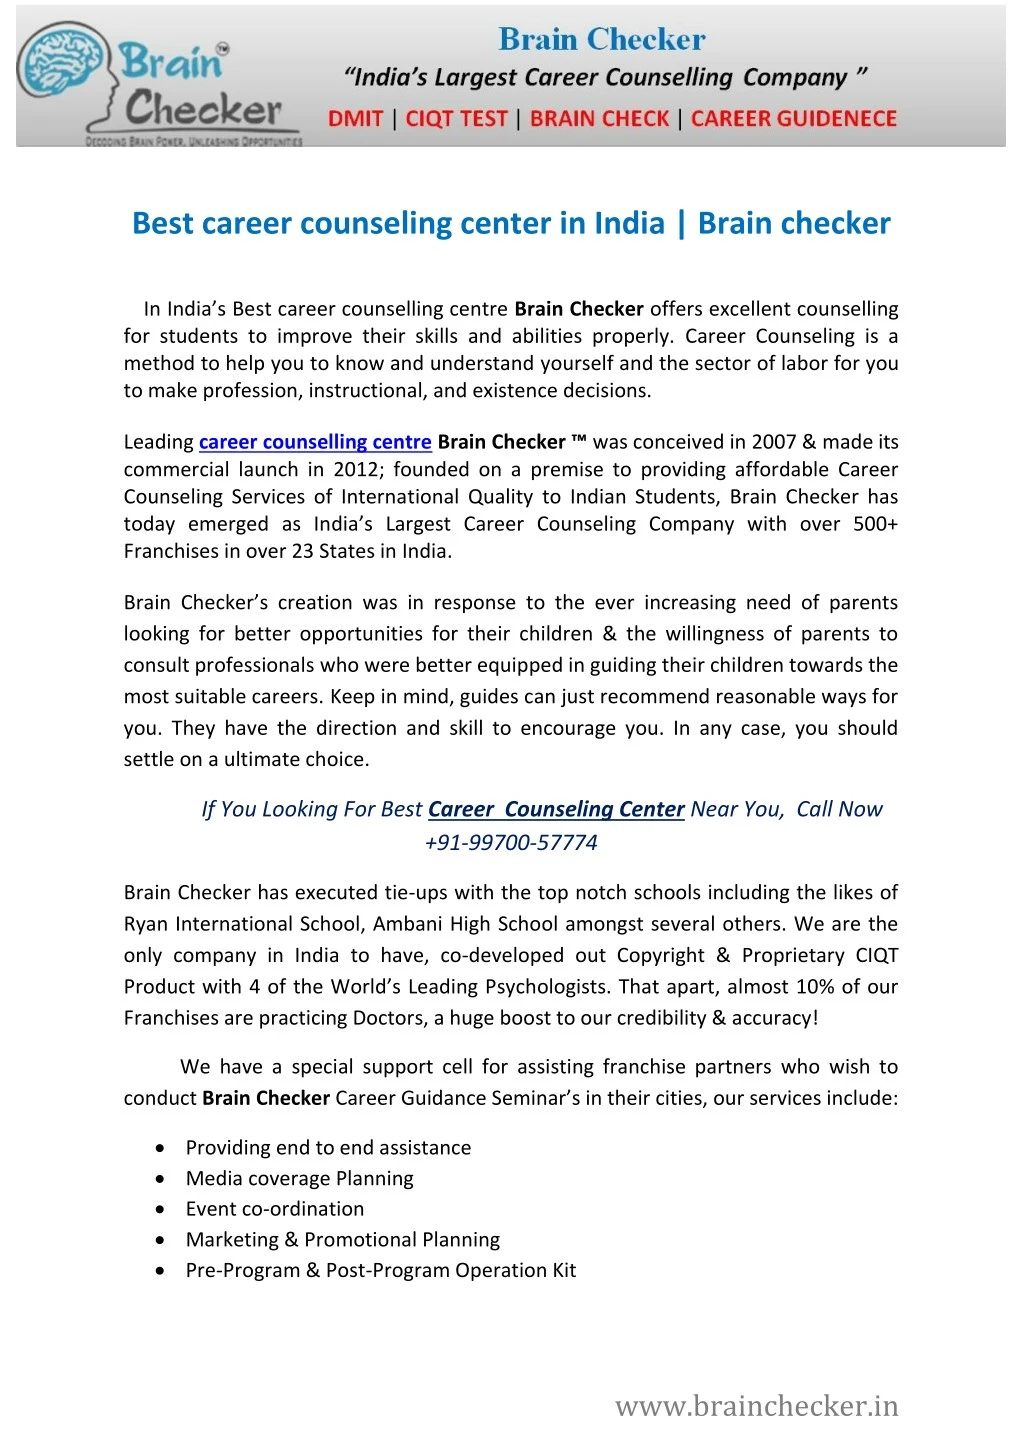 best career counseling center in india brain